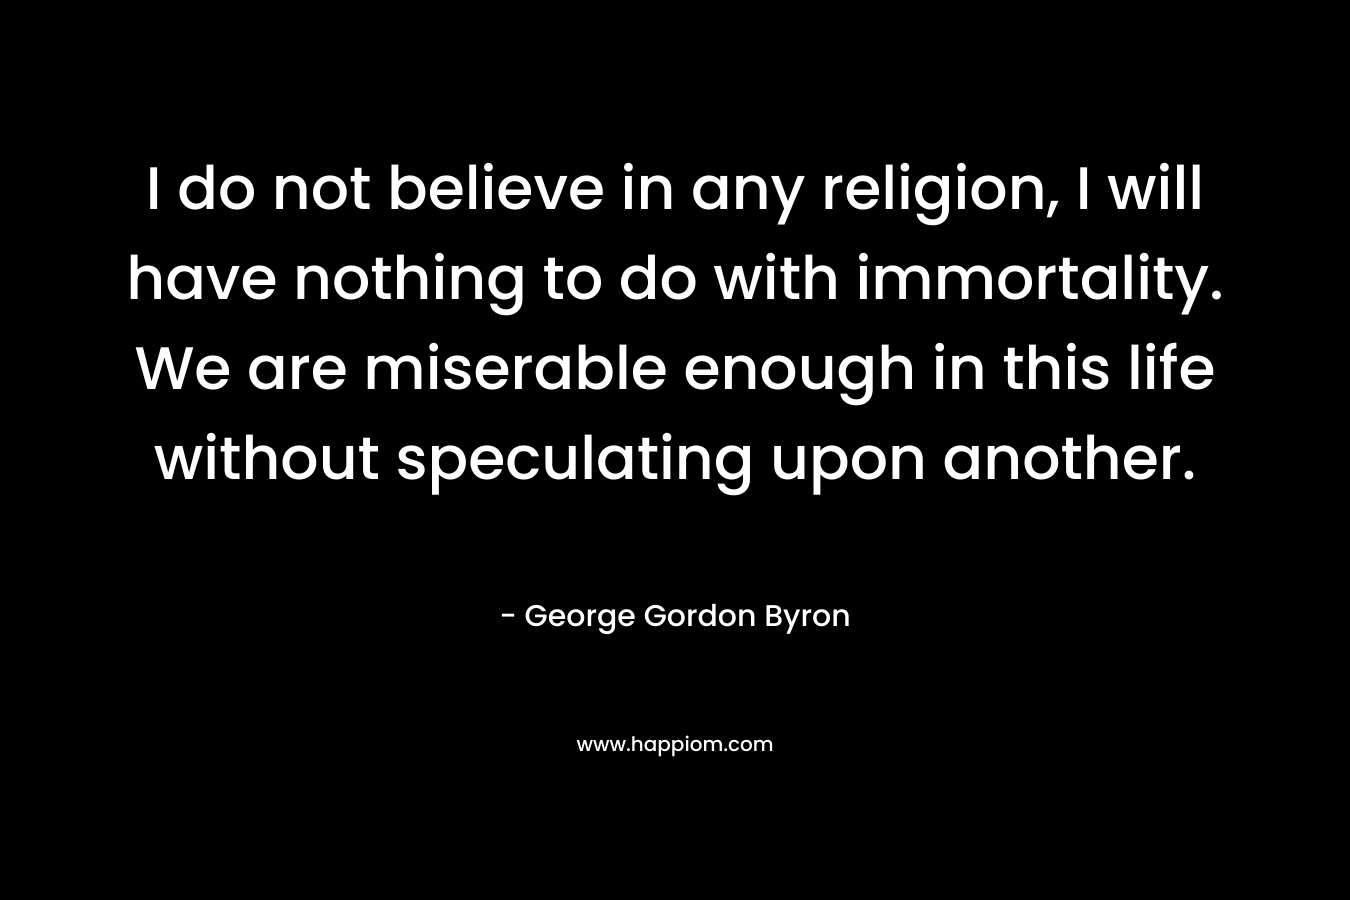 I do not believe in any religion, I will have nothing to do with immortality. We are miserable enough in this life without speculating upon another. – George Gordon Byron